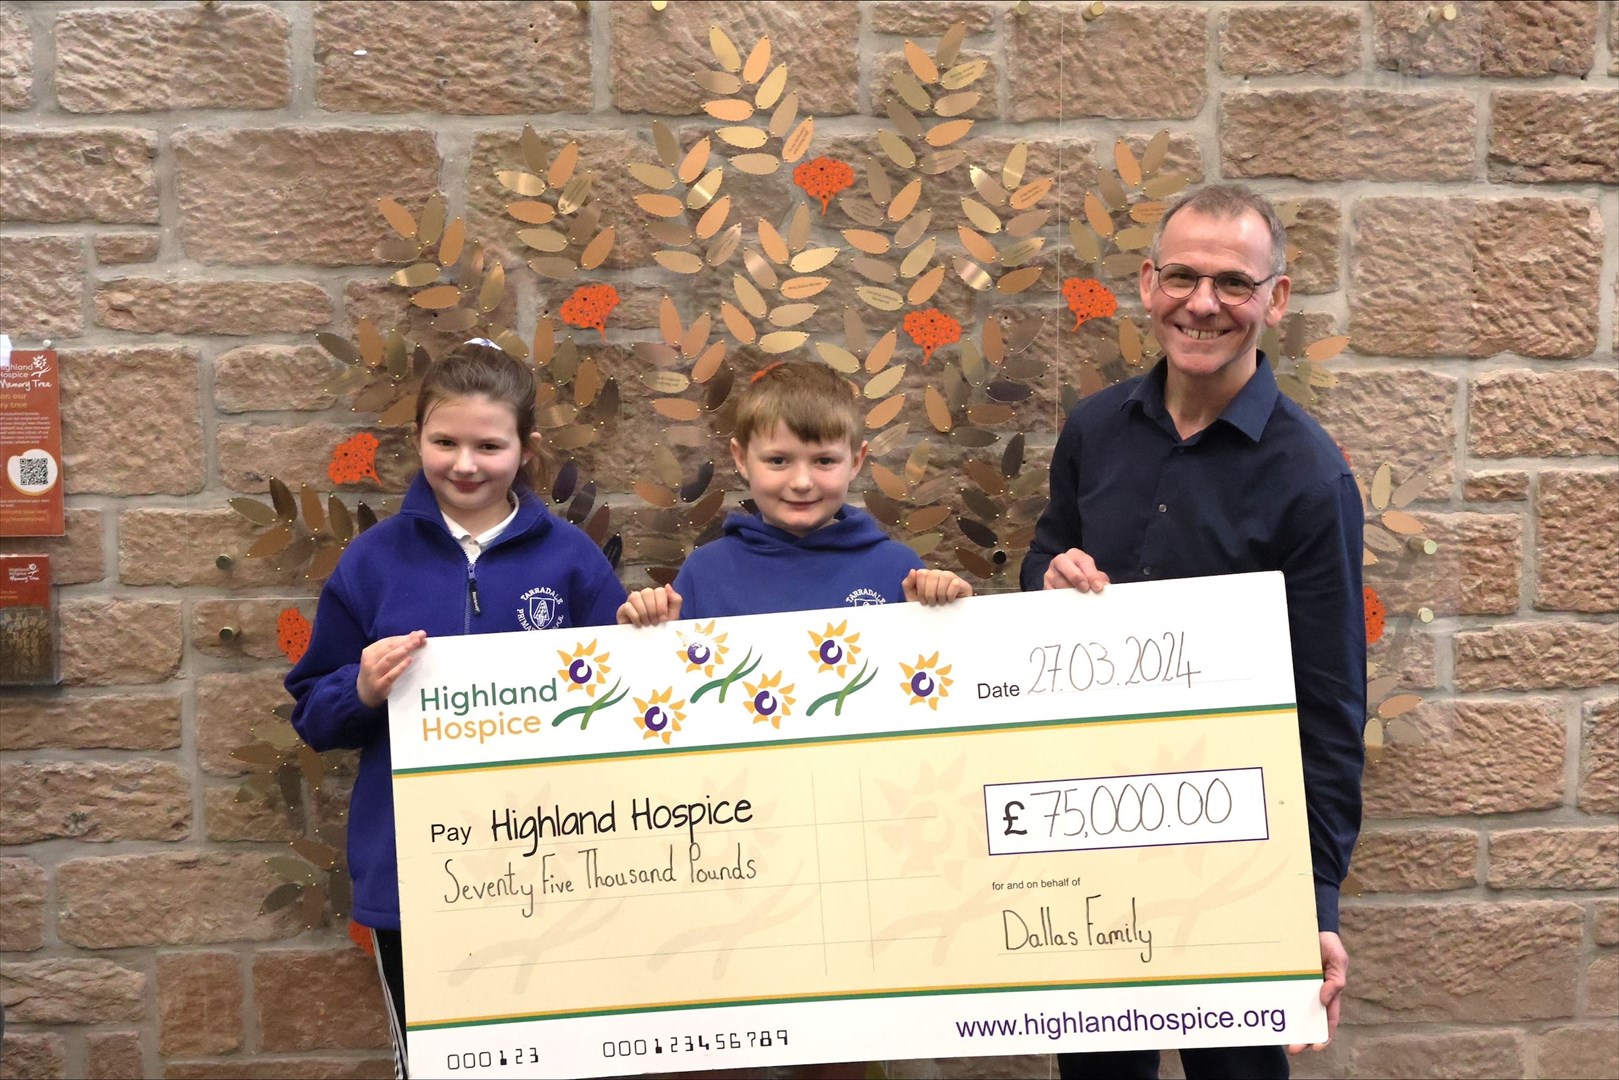 Isla and Murray Dallas, handing the £75,000 donation to Highland Hospice head of income, Andrew Leaver. Picture: Highland Hospice.